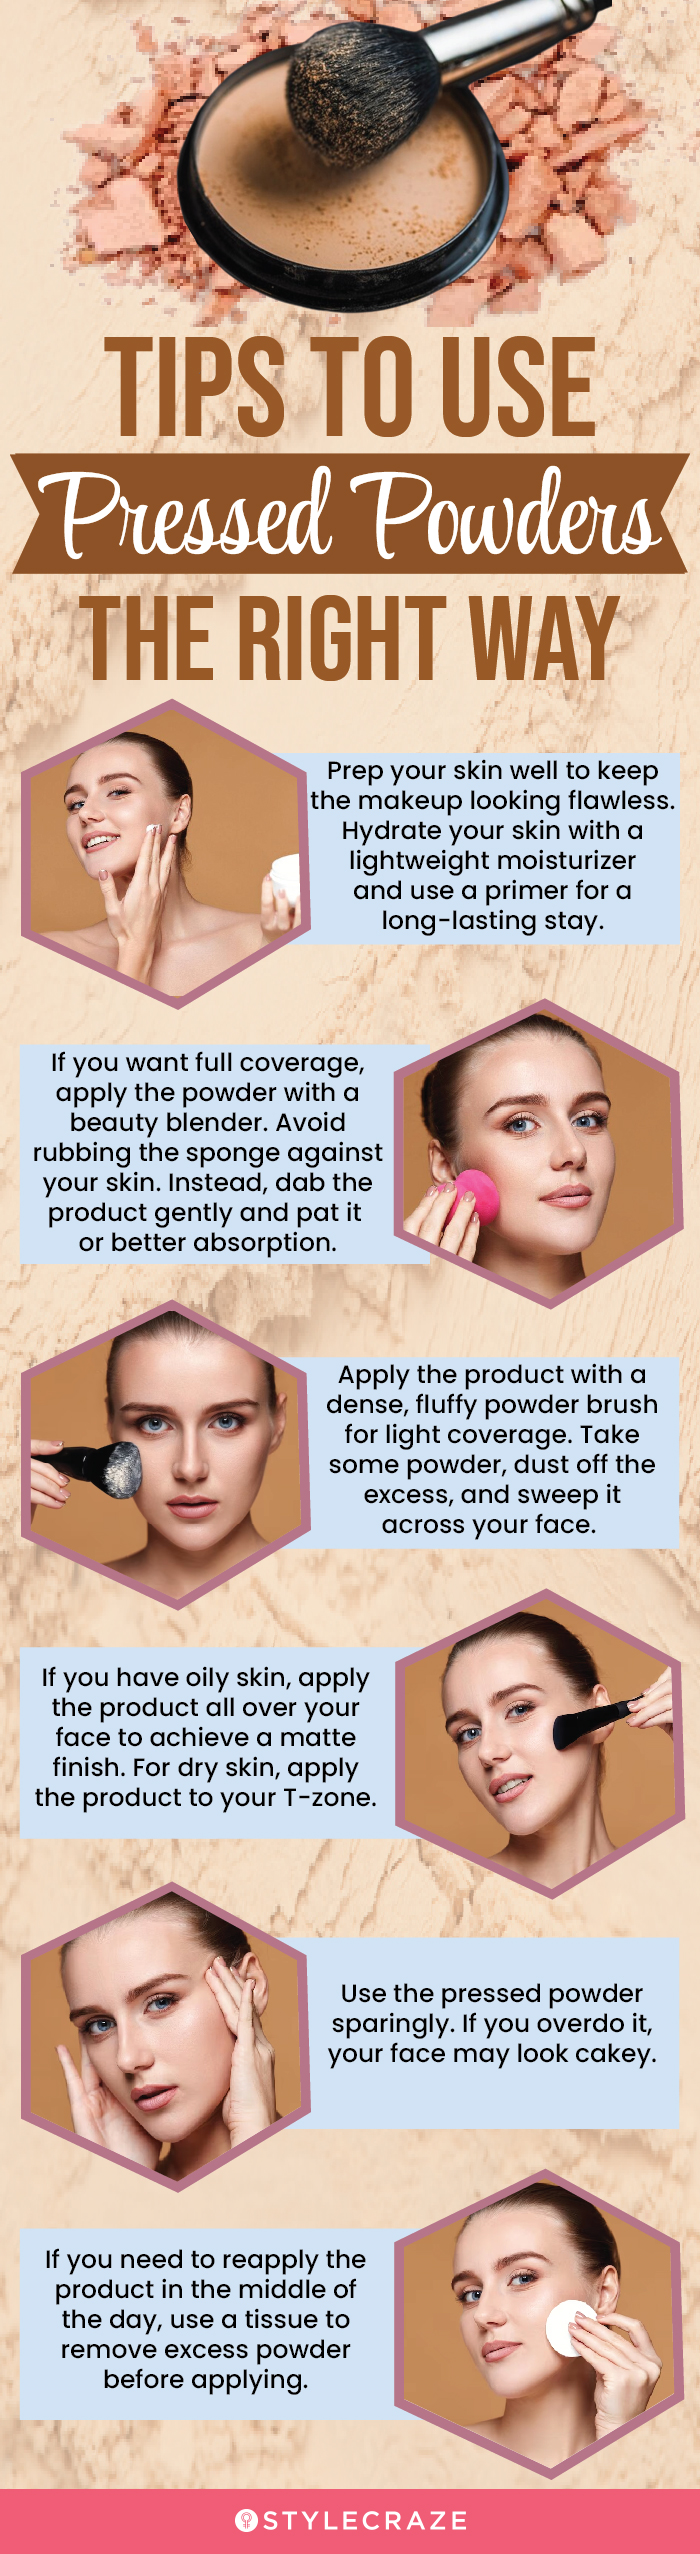 Tips To Use Pressed Powders The Right Way (infographic)